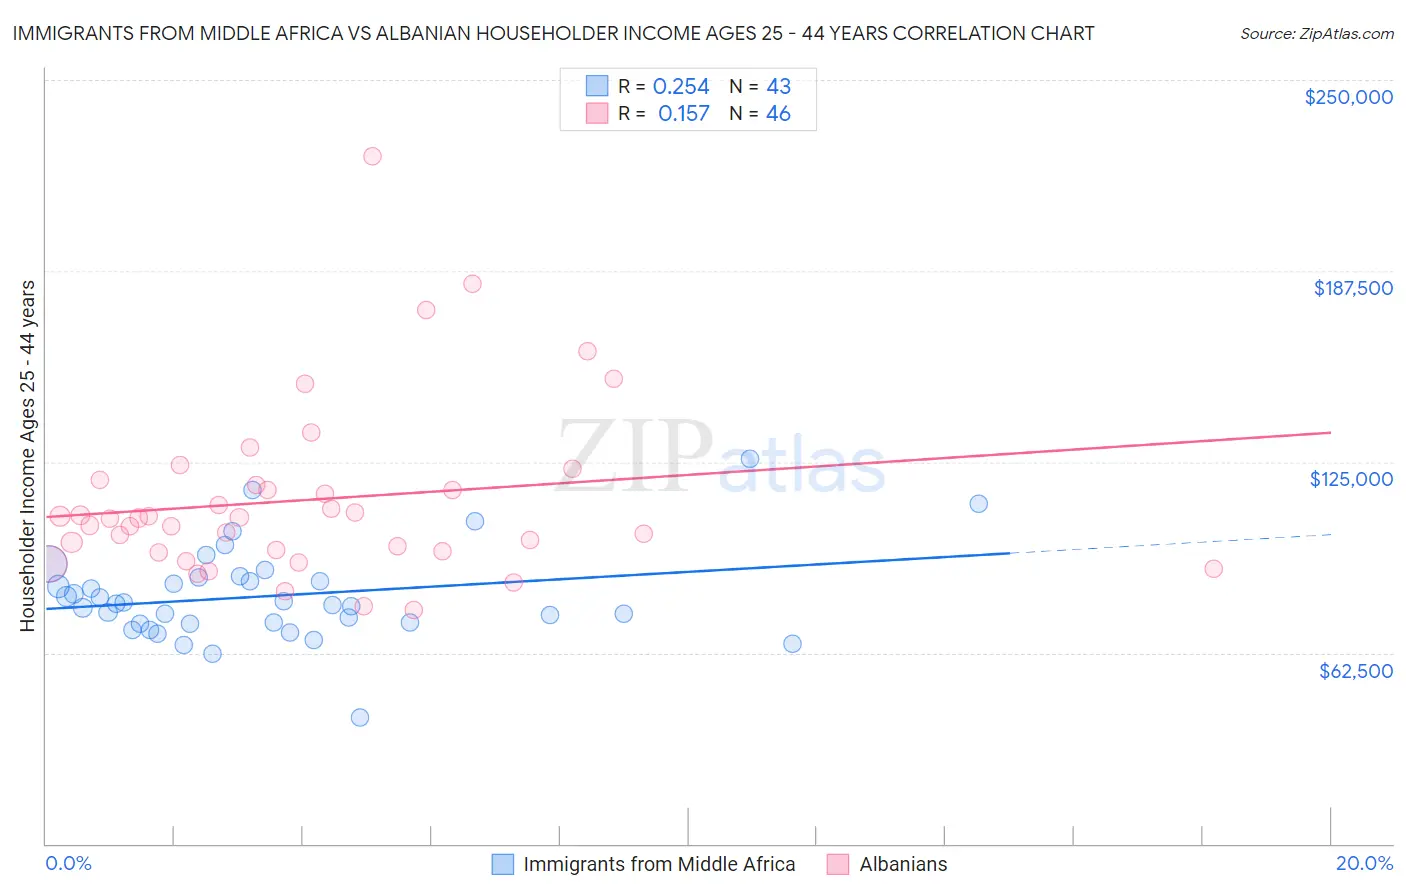 Immigrants from Middle Africa vs Albanian Householder Income Ages 25 - 44 years